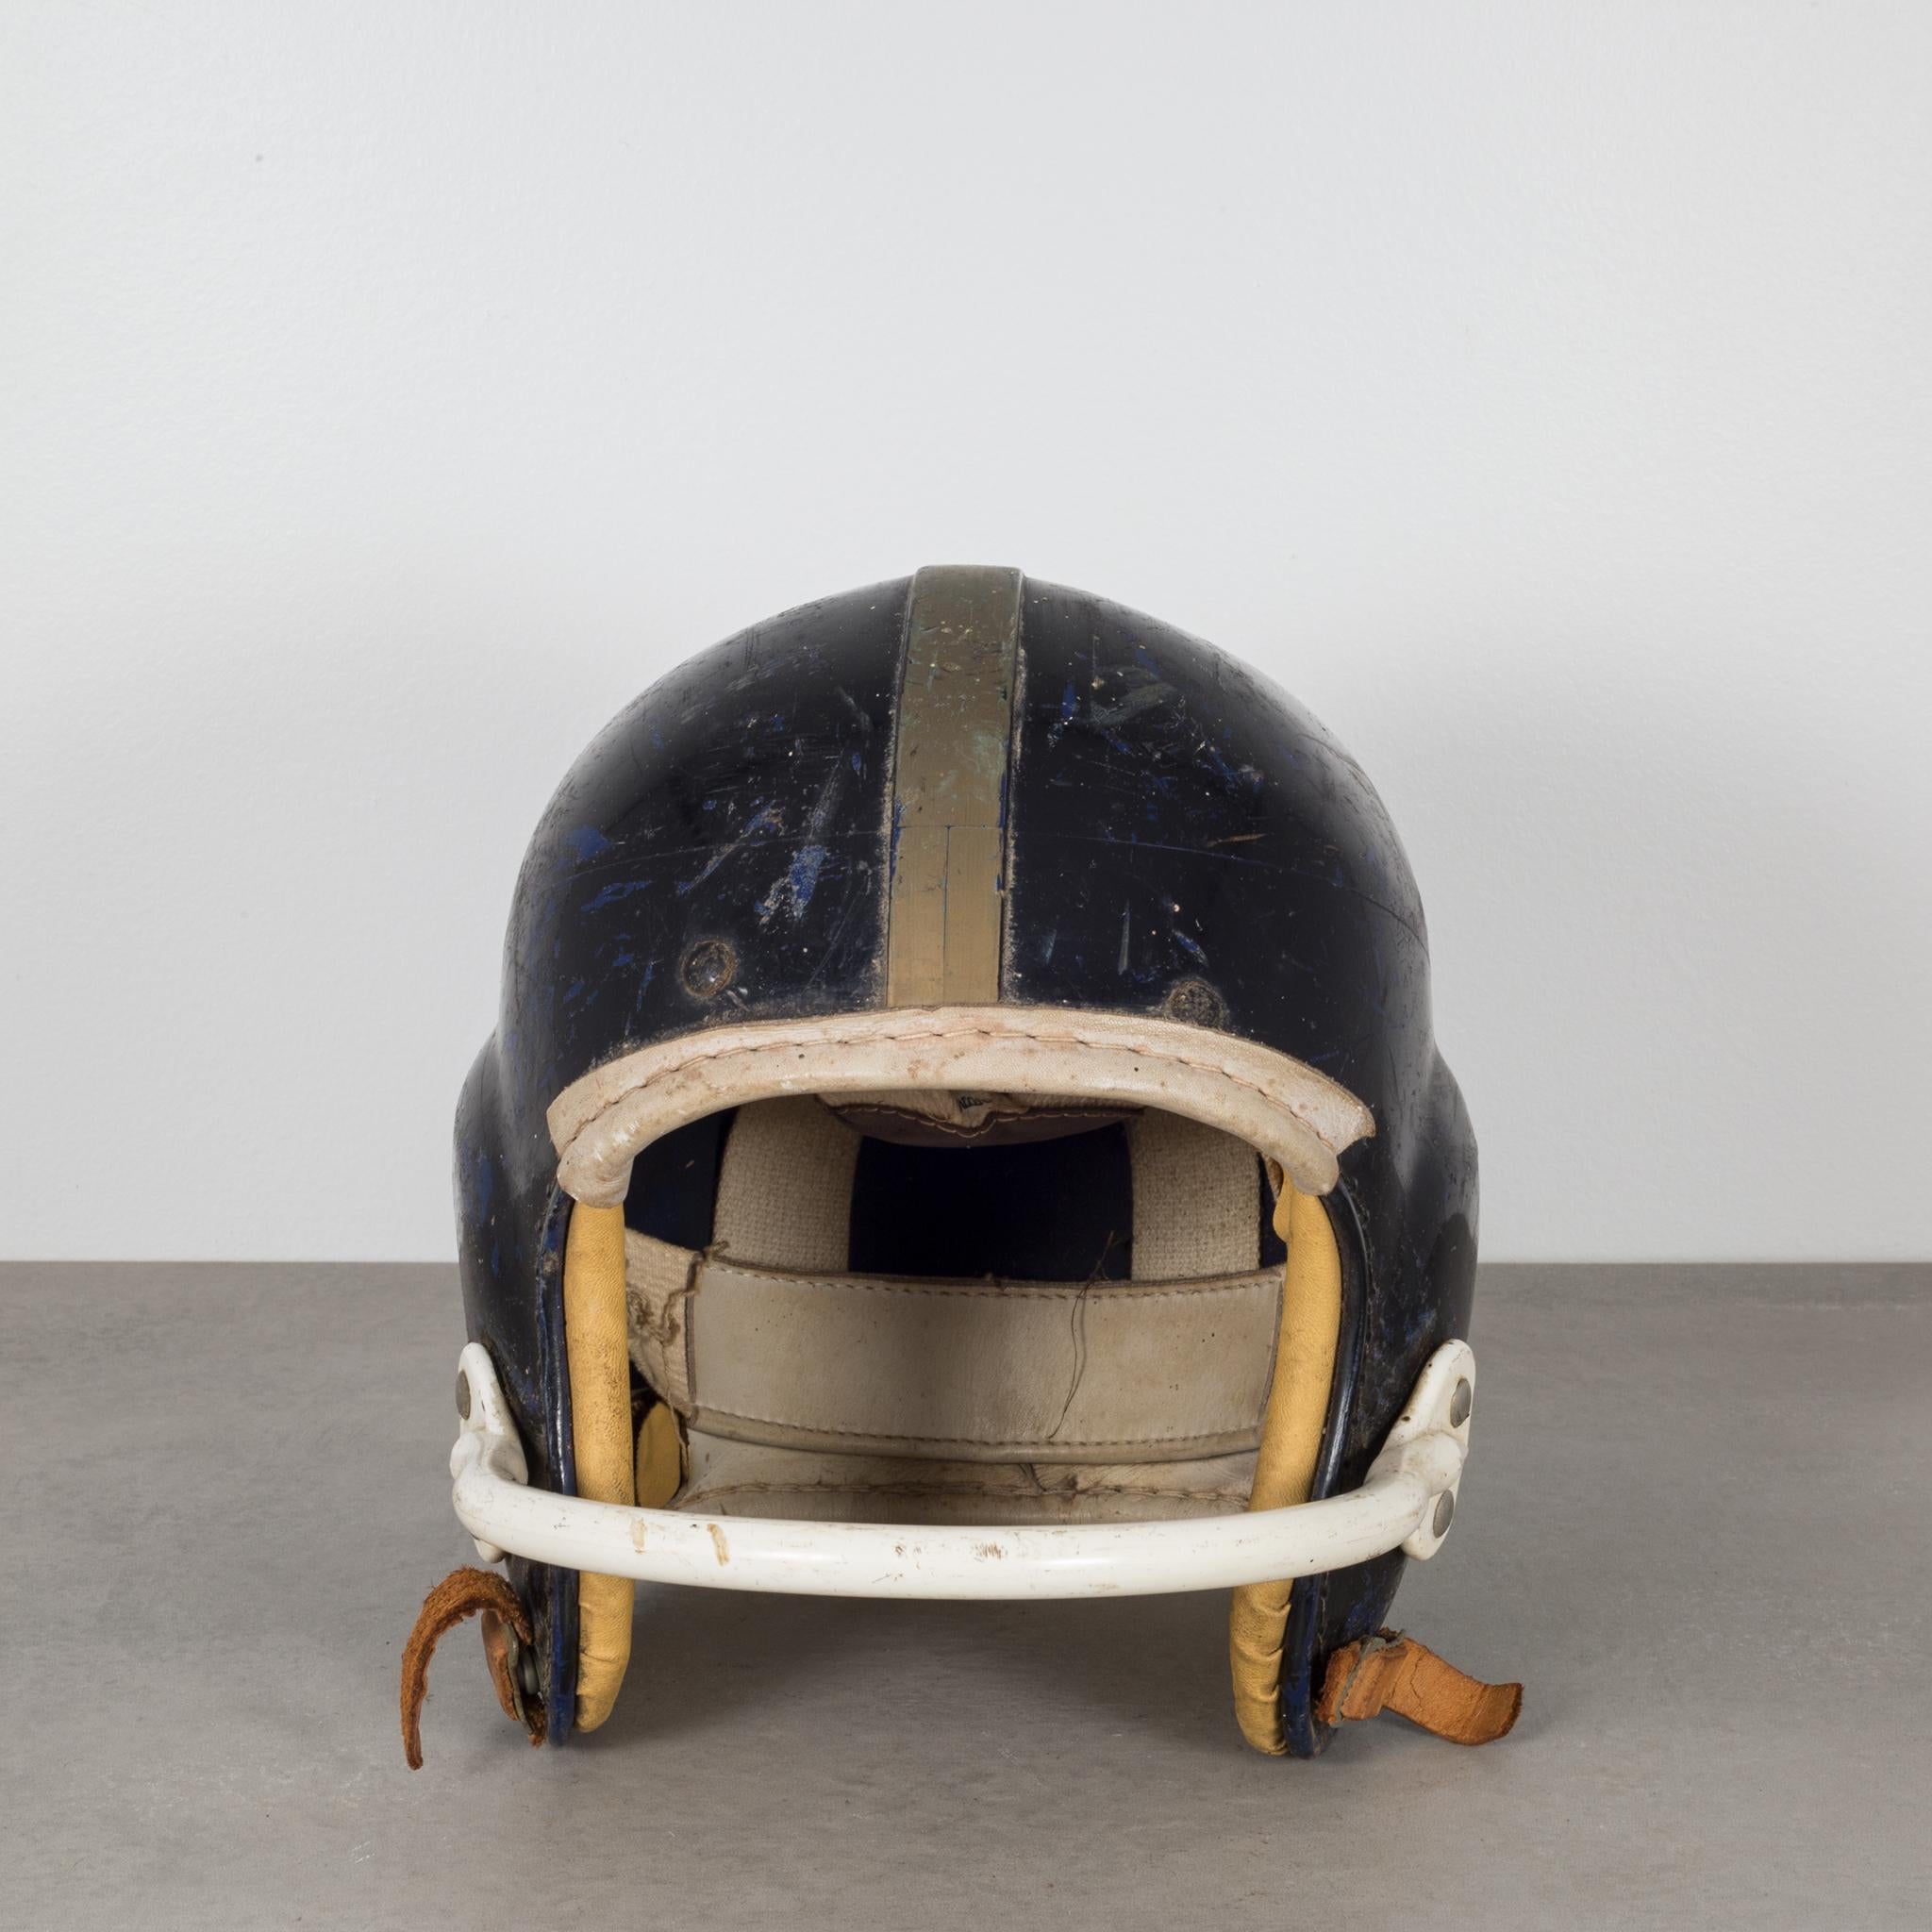 About
An original vintage football helmet with a single bar face mask. The helmet is black with a gold stripe running down the center, white face bar, and leather cushion on the forehead and back of the head. A 